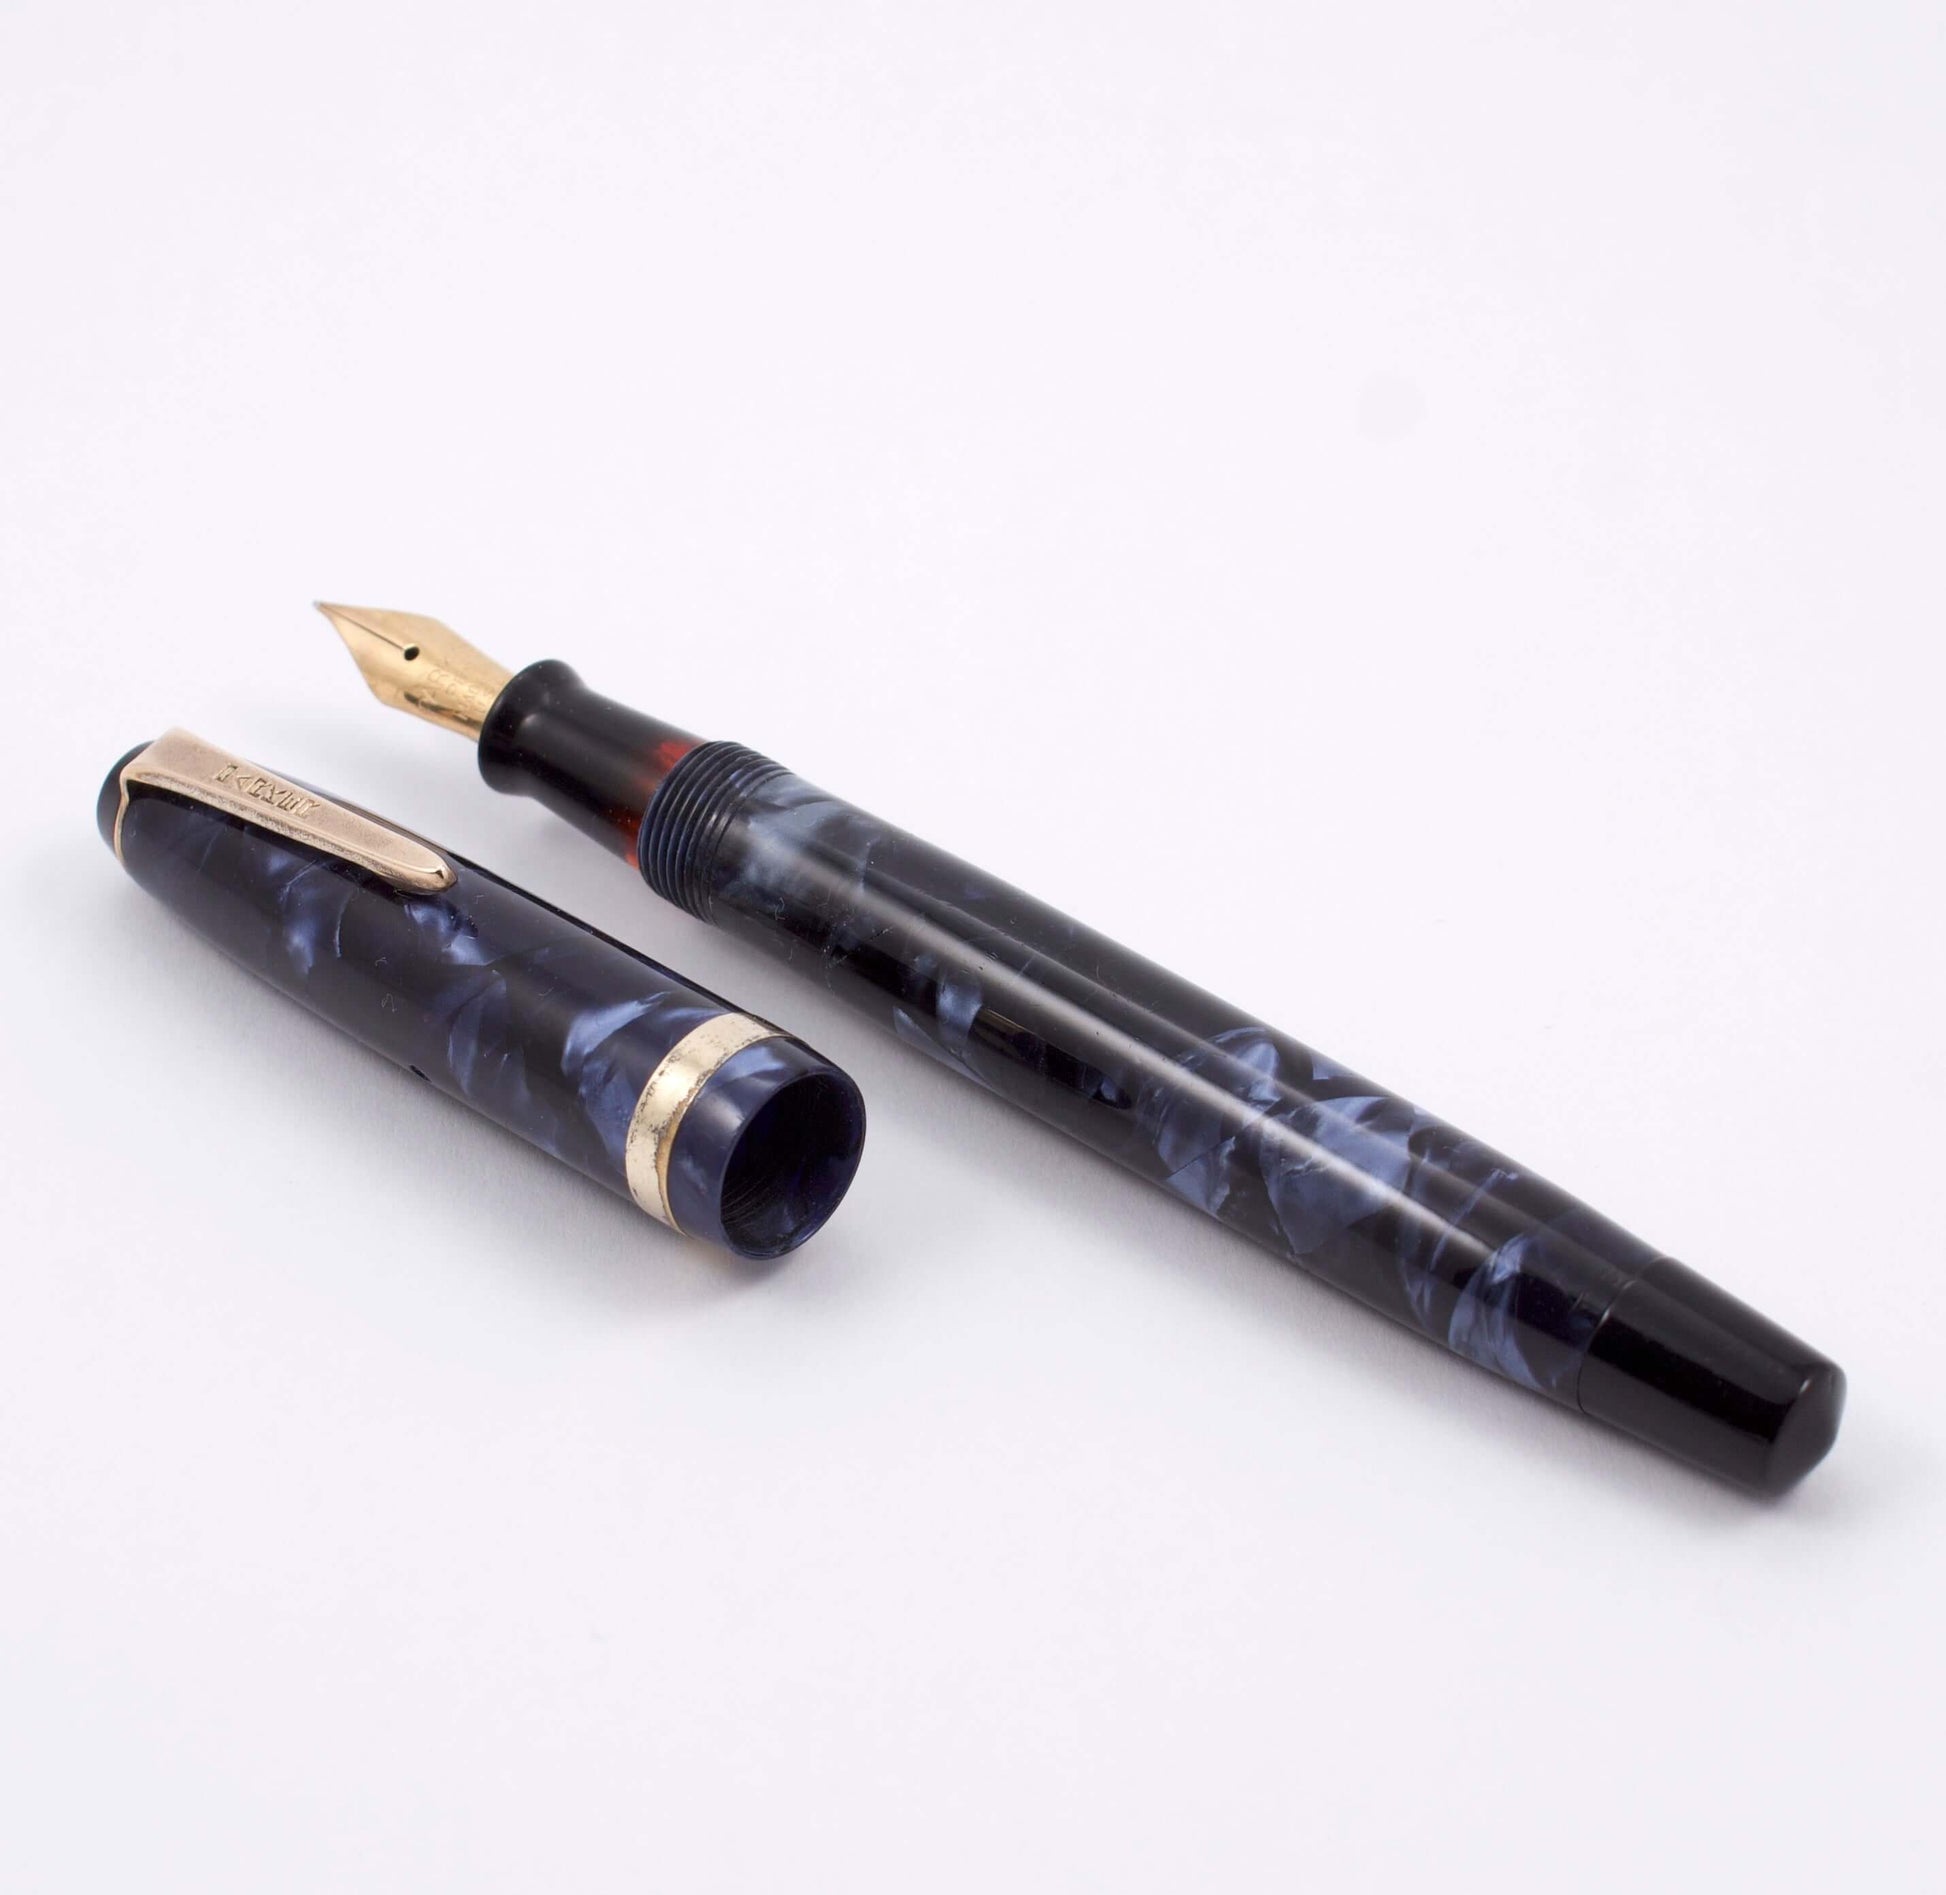 Parker Challenger, Blue Marble, Button Filler, Fine 14K Gold Nib, Restored Type: Parker Button Filler Fountain Pen Manufacture Year: 1940 Length: 4 3/4 small, petite Filling System: Button filler with new sac in working condition Color/Pattern: Blue Marbl